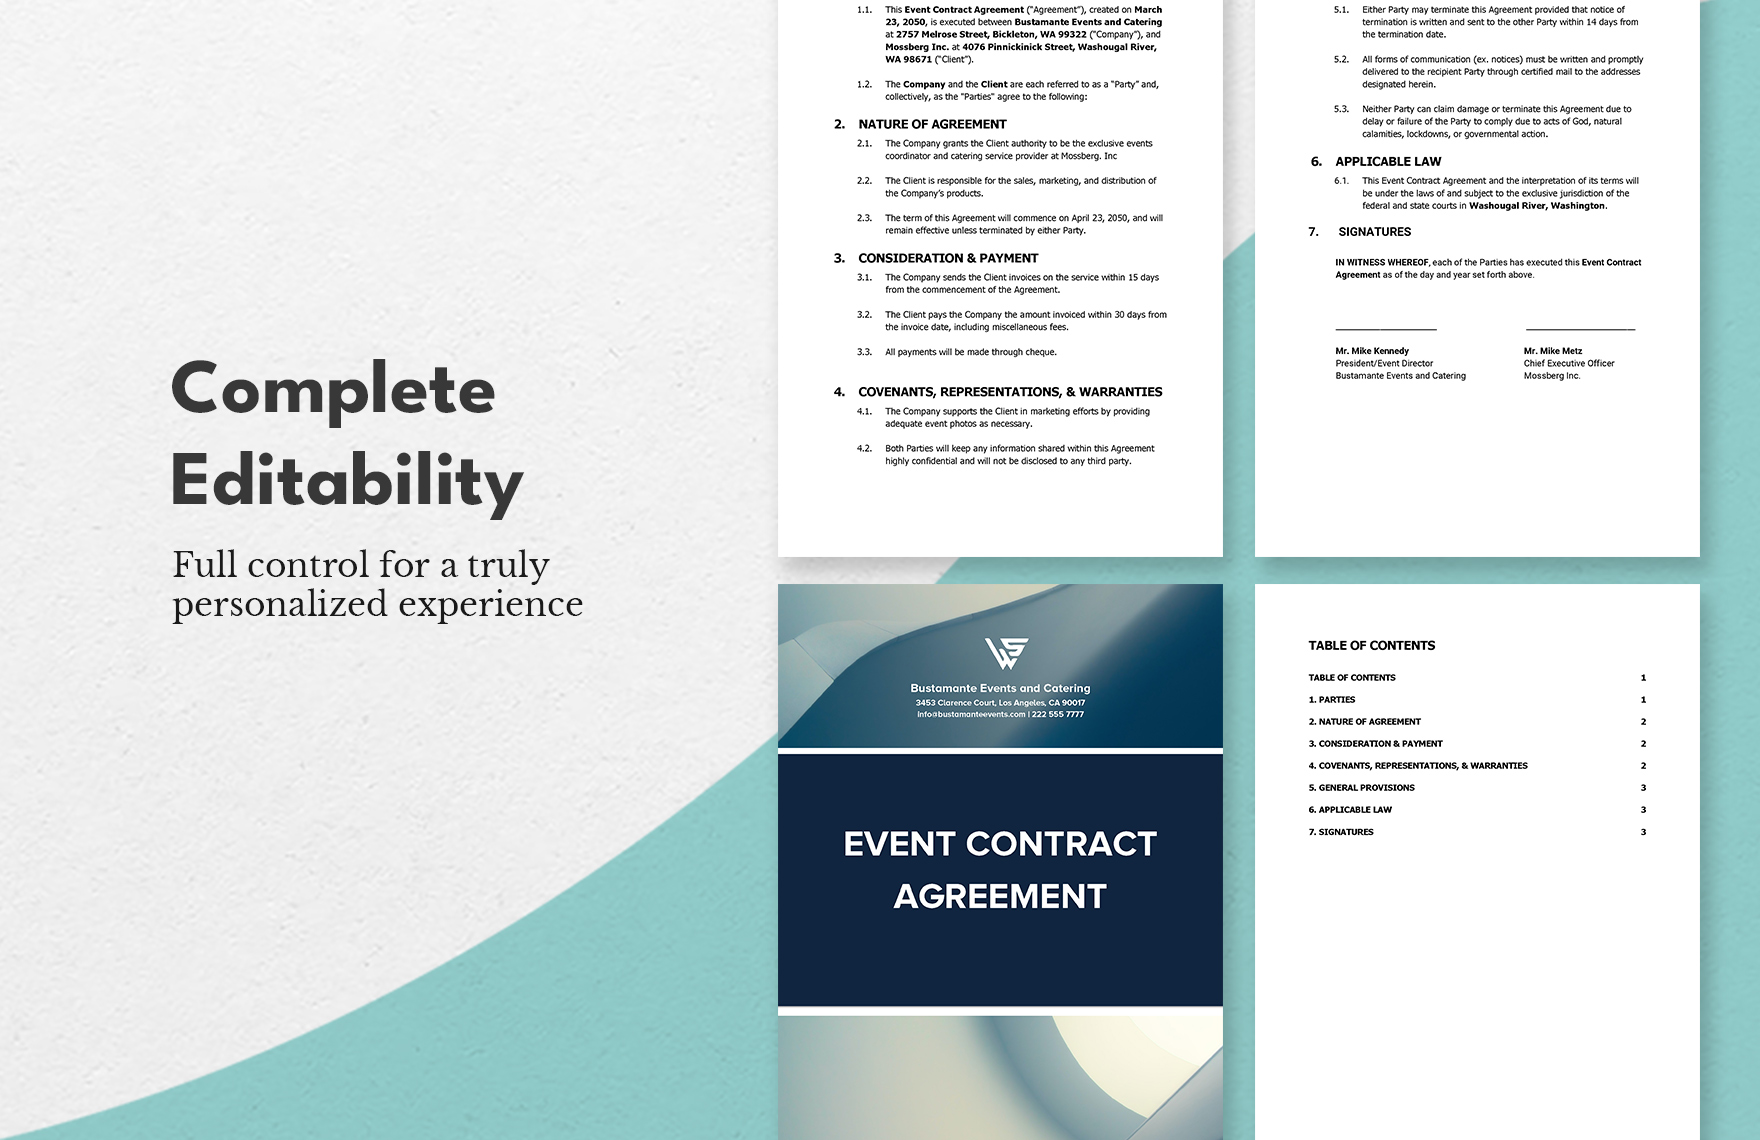 Event Contract Agreement Template